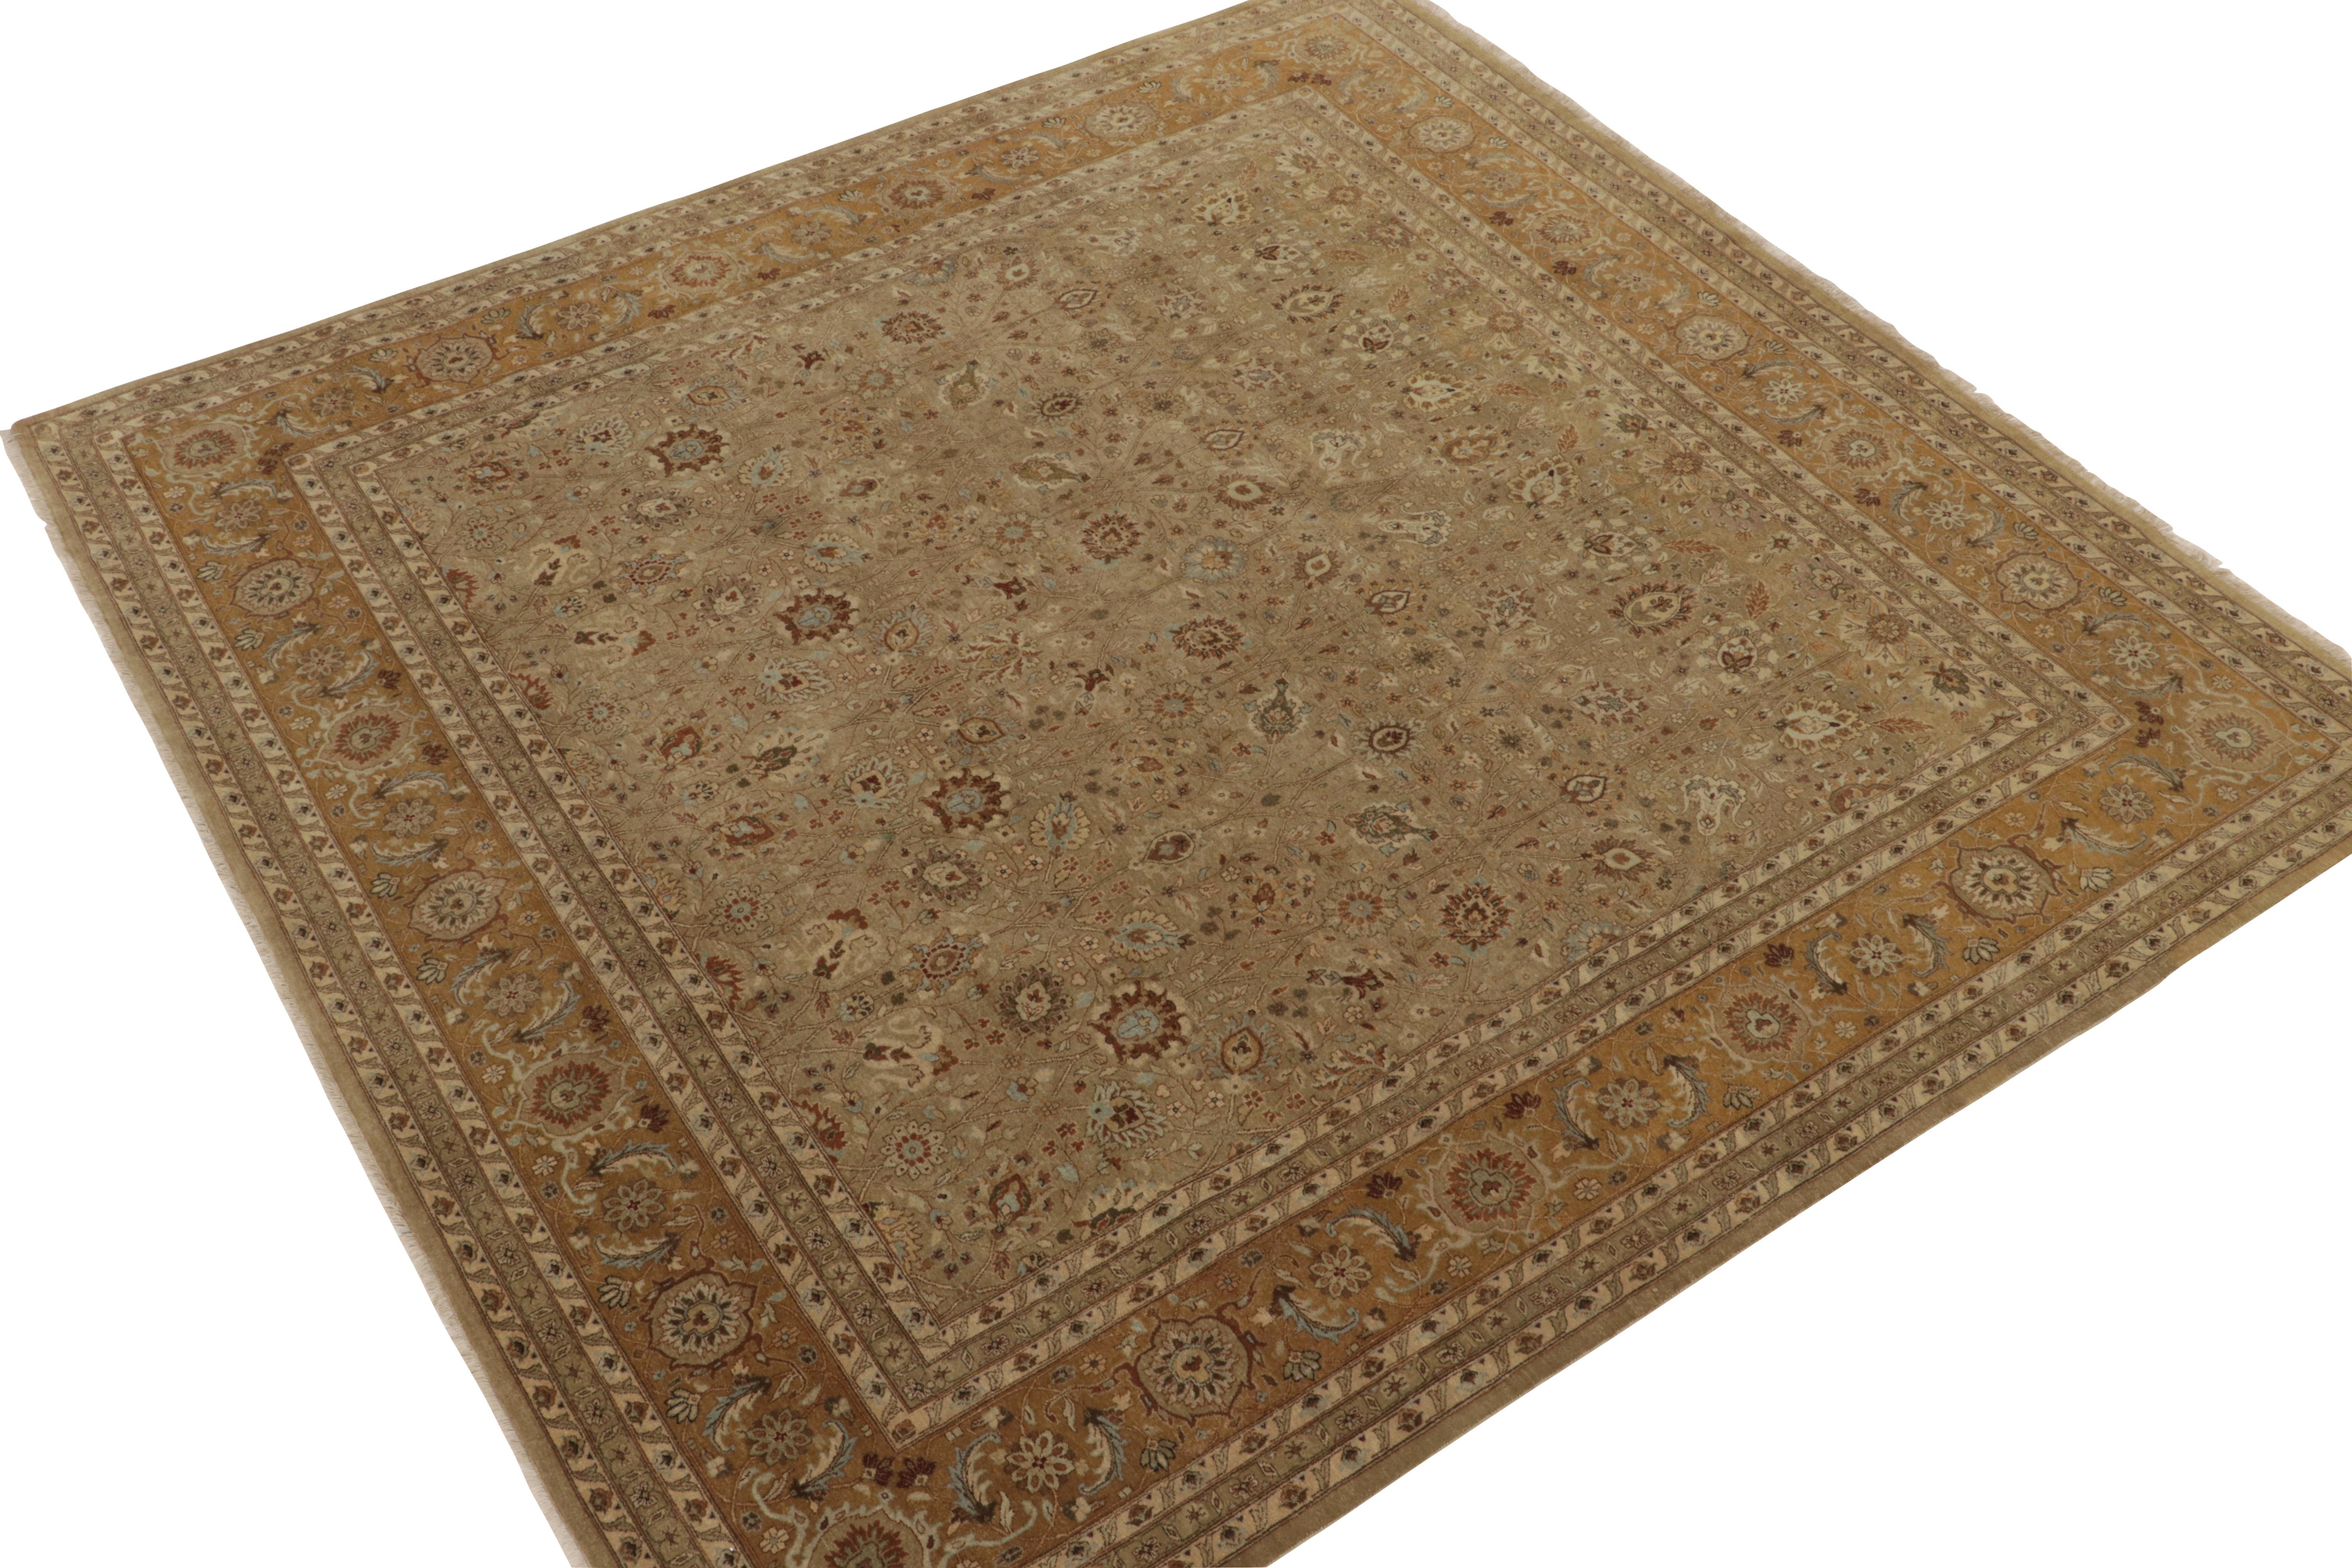 Hand-knotted in wool, this 9x9 square rug from our Modern Classics collection is a contemporary take on antique Persian rugs. 

The design enjoys an all over floral pattern in variegated tones of beige & brown & rich gold with subtle blue detailing.